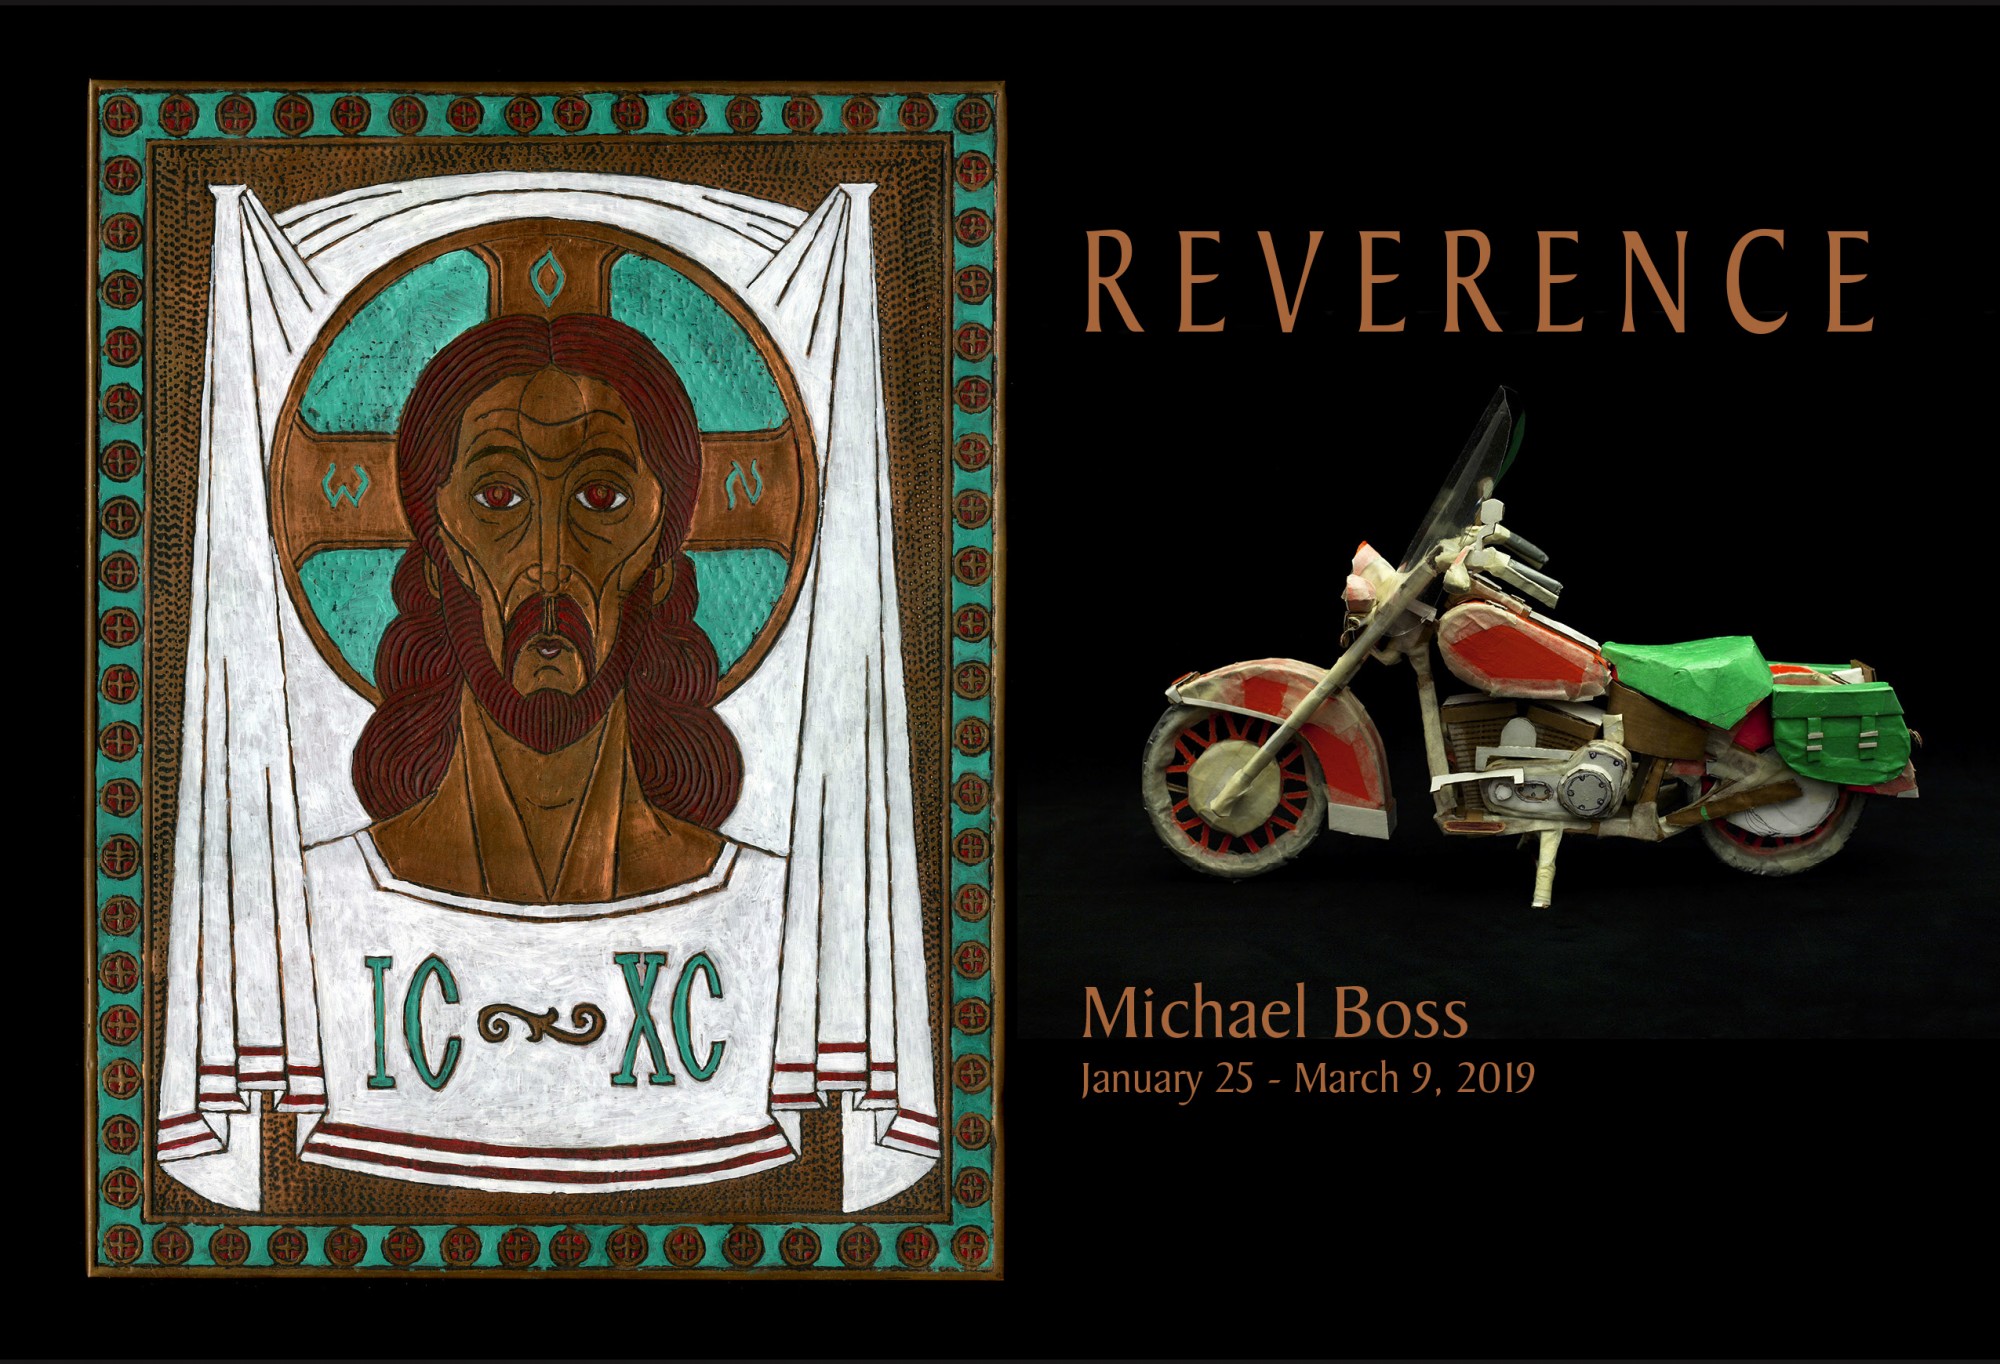 REVERENCE by Michael Boss